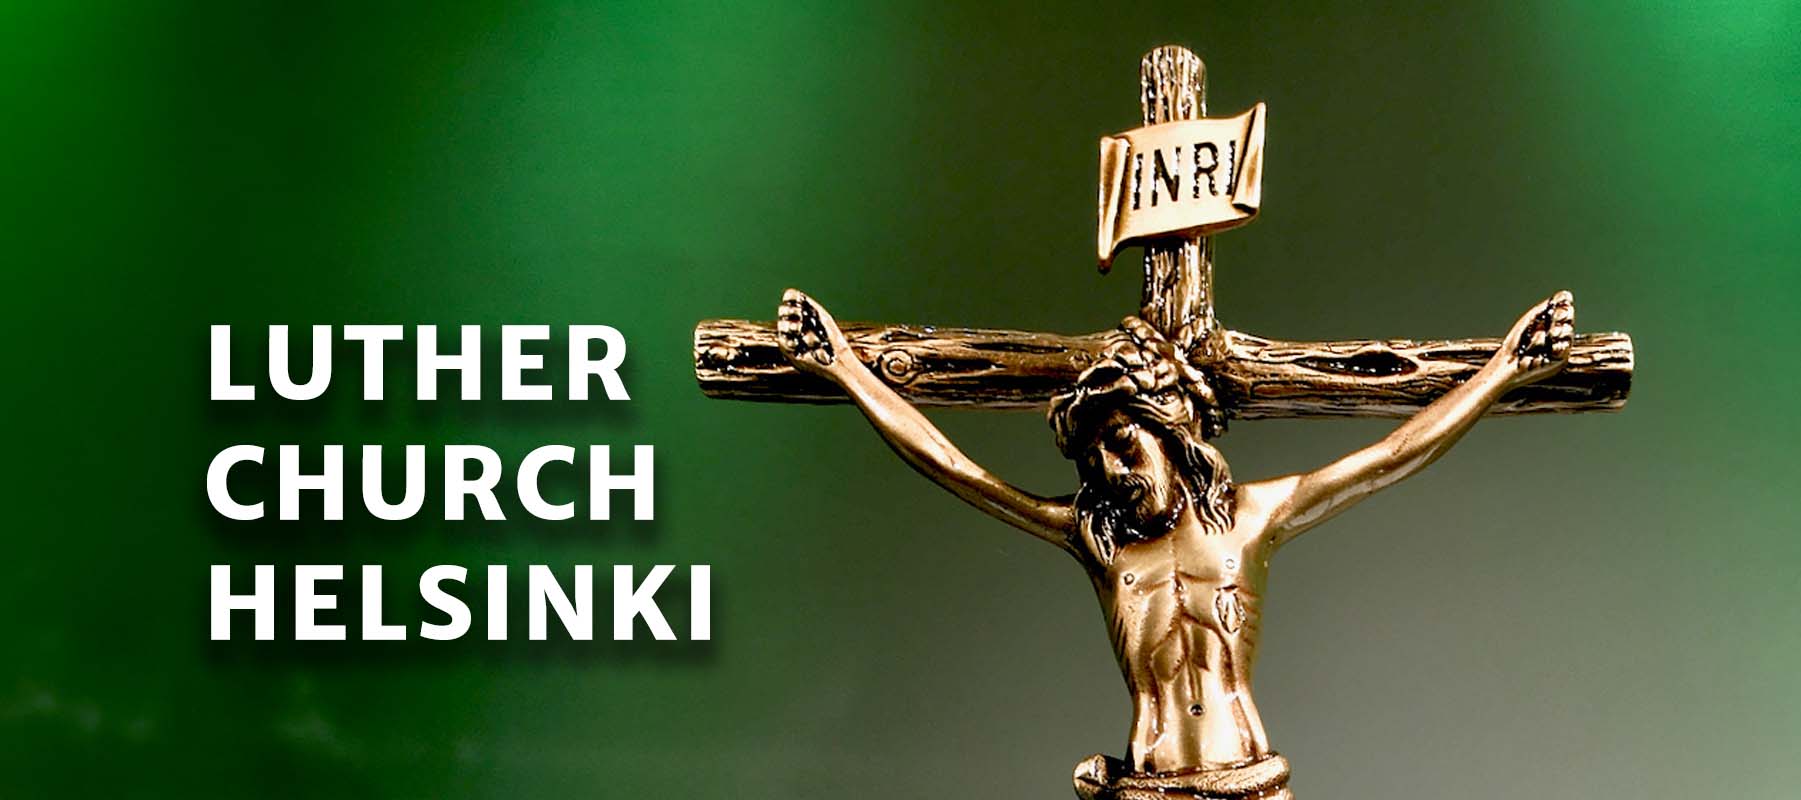 In the picture there is a crucifix and a text: "Luther Church Helsinki"